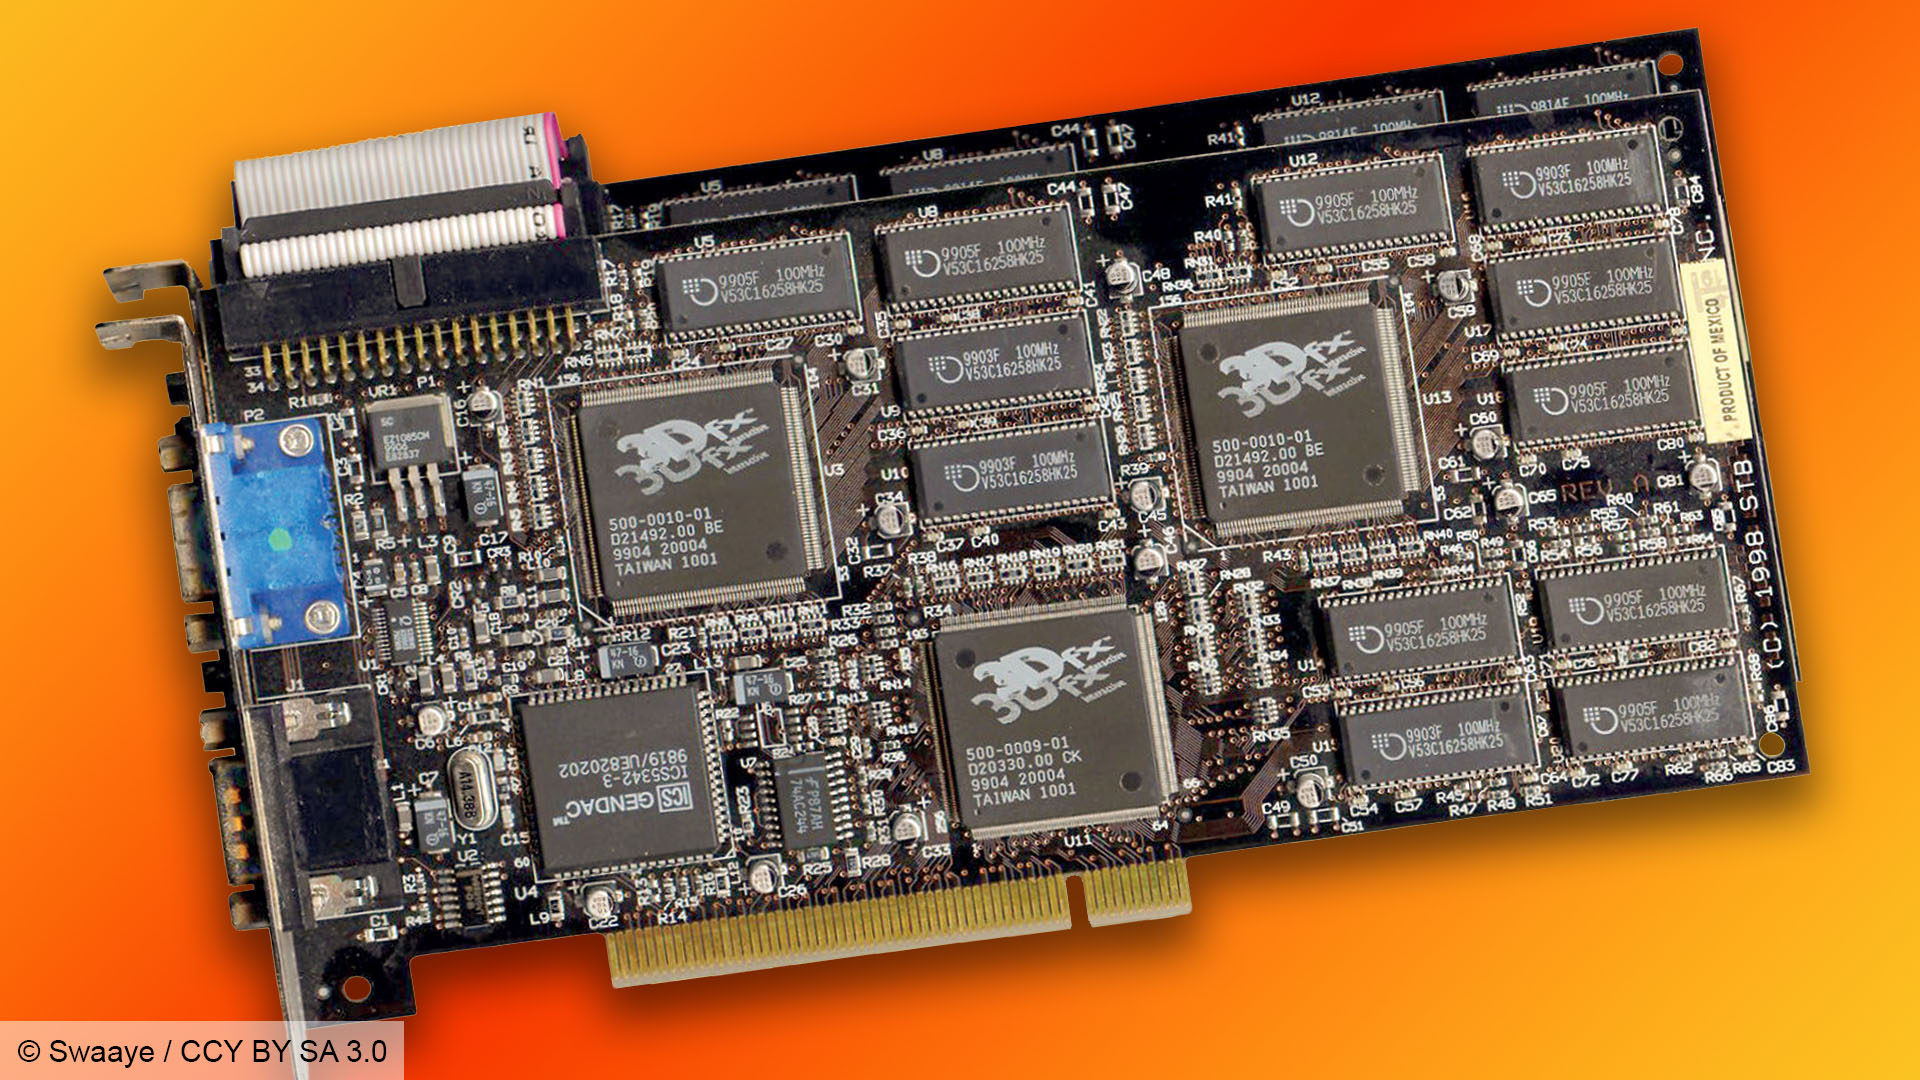 3dfx Voodoo 2: A pair of STB graphics cards connected by an SLI ribbon cable - by Swaaye